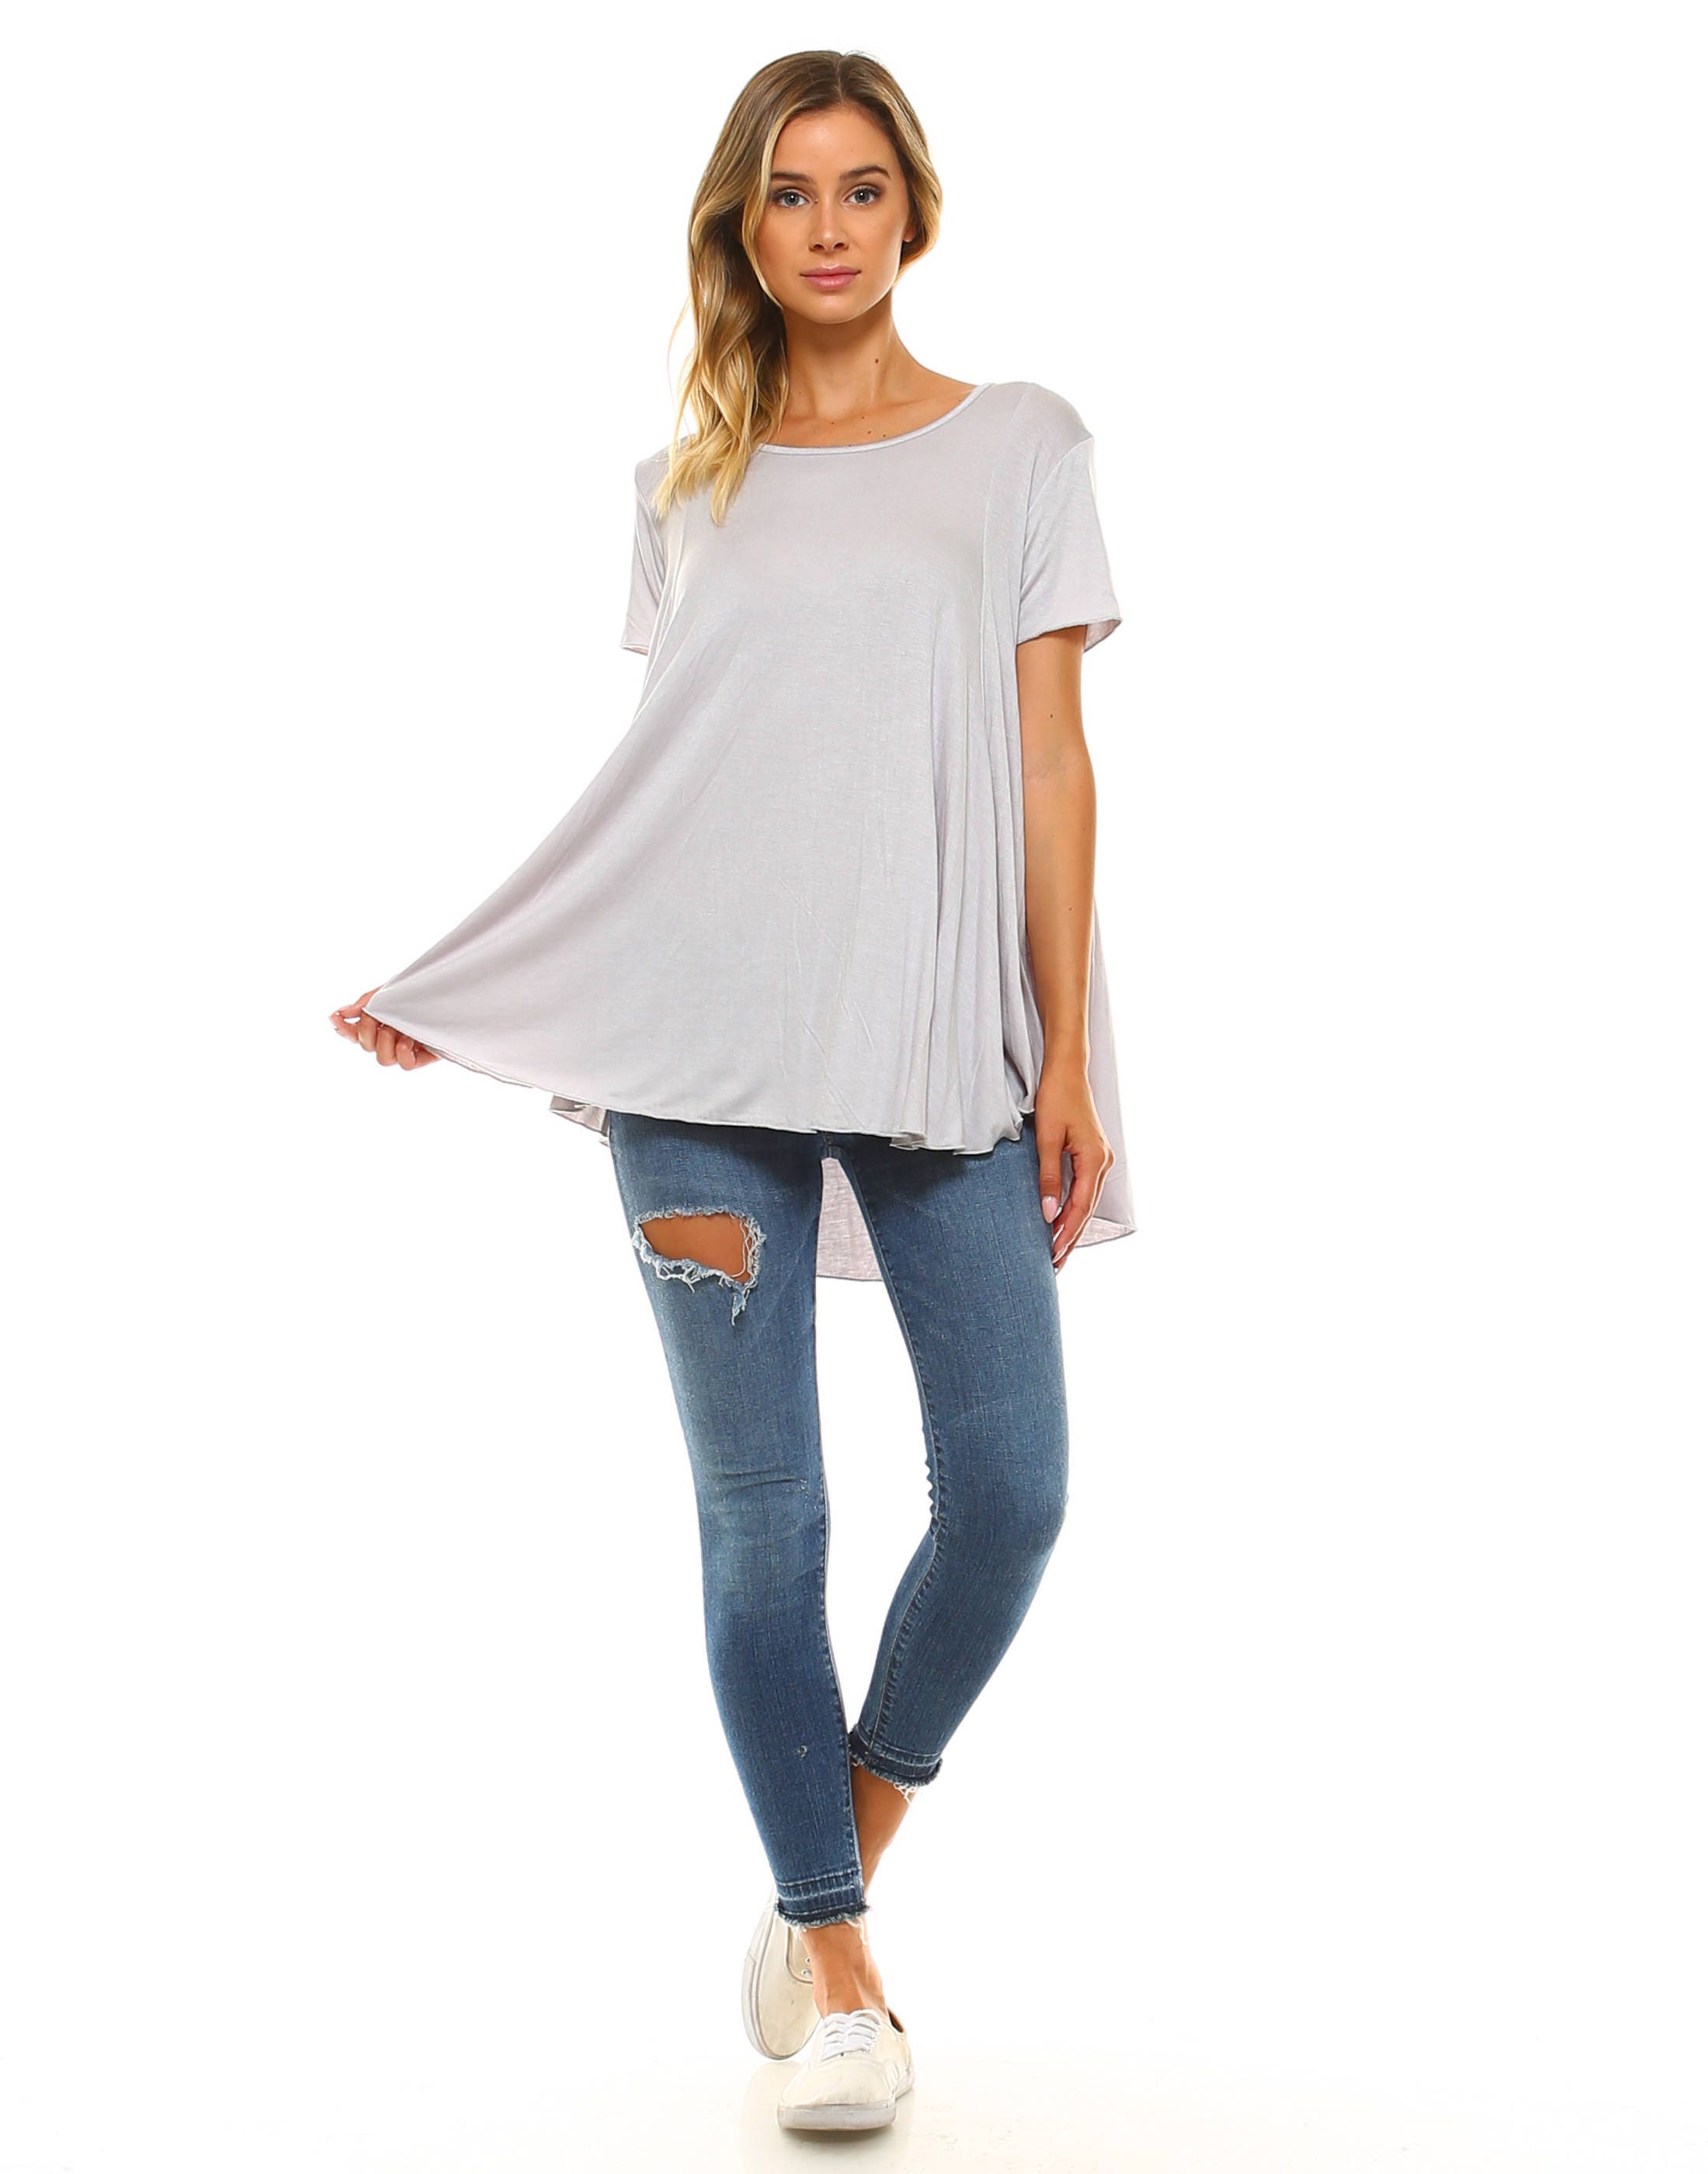 Women's Grey Flowy Swing Tunic Top Scoop Neck Gifts for